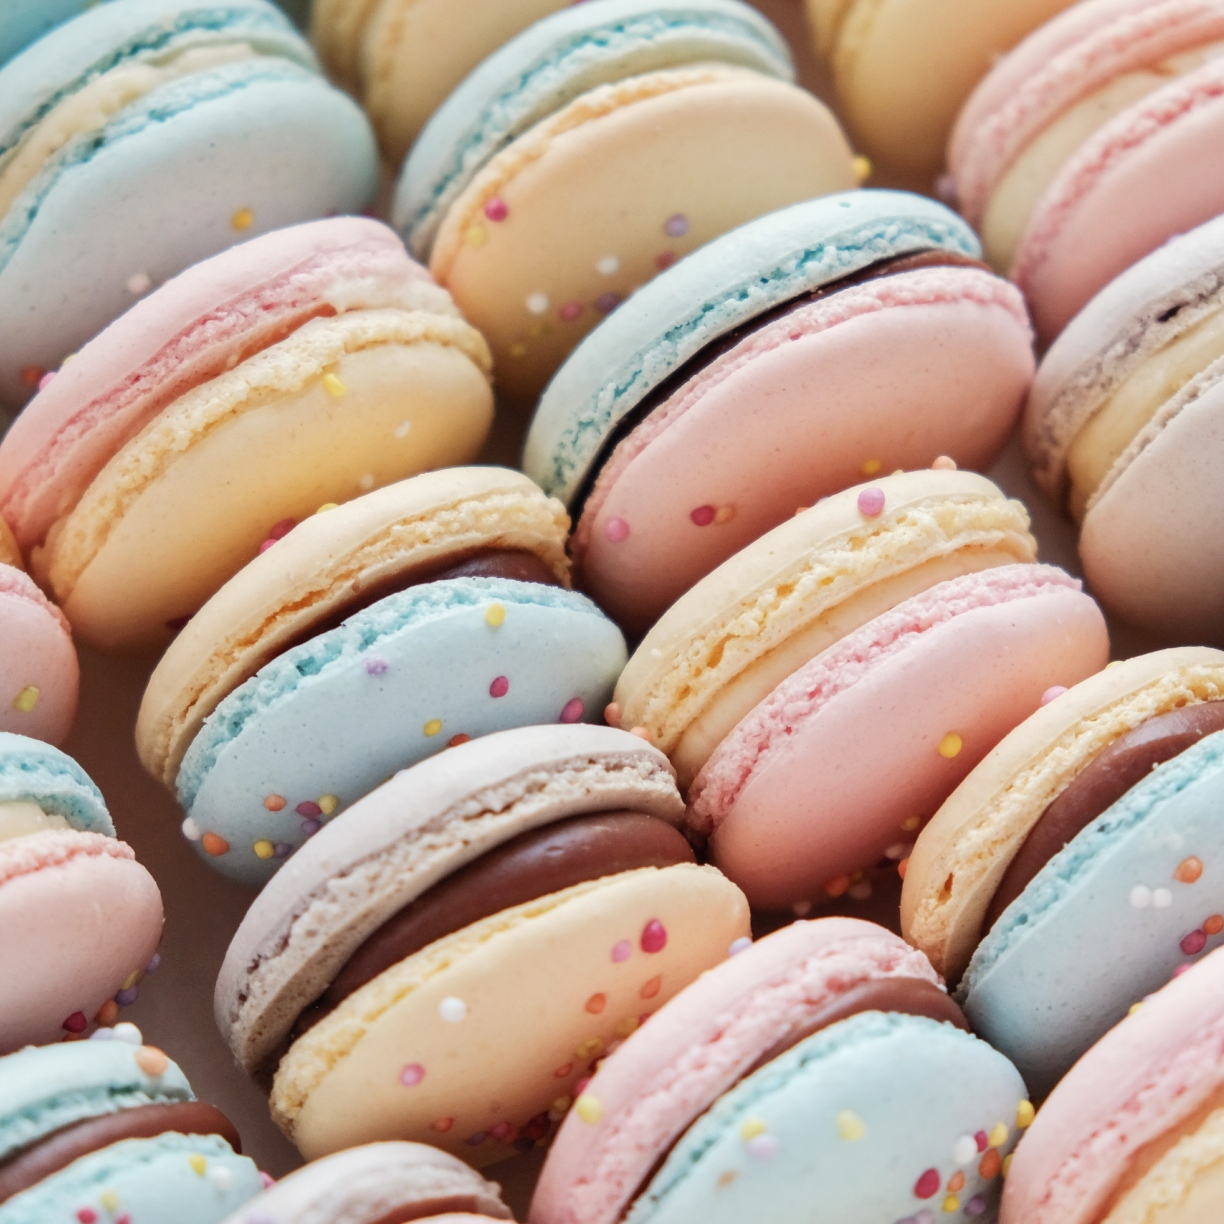 Wallpaper colorful, sweets, macarons desktop wallpaper, HD image, picture, background, aafde1